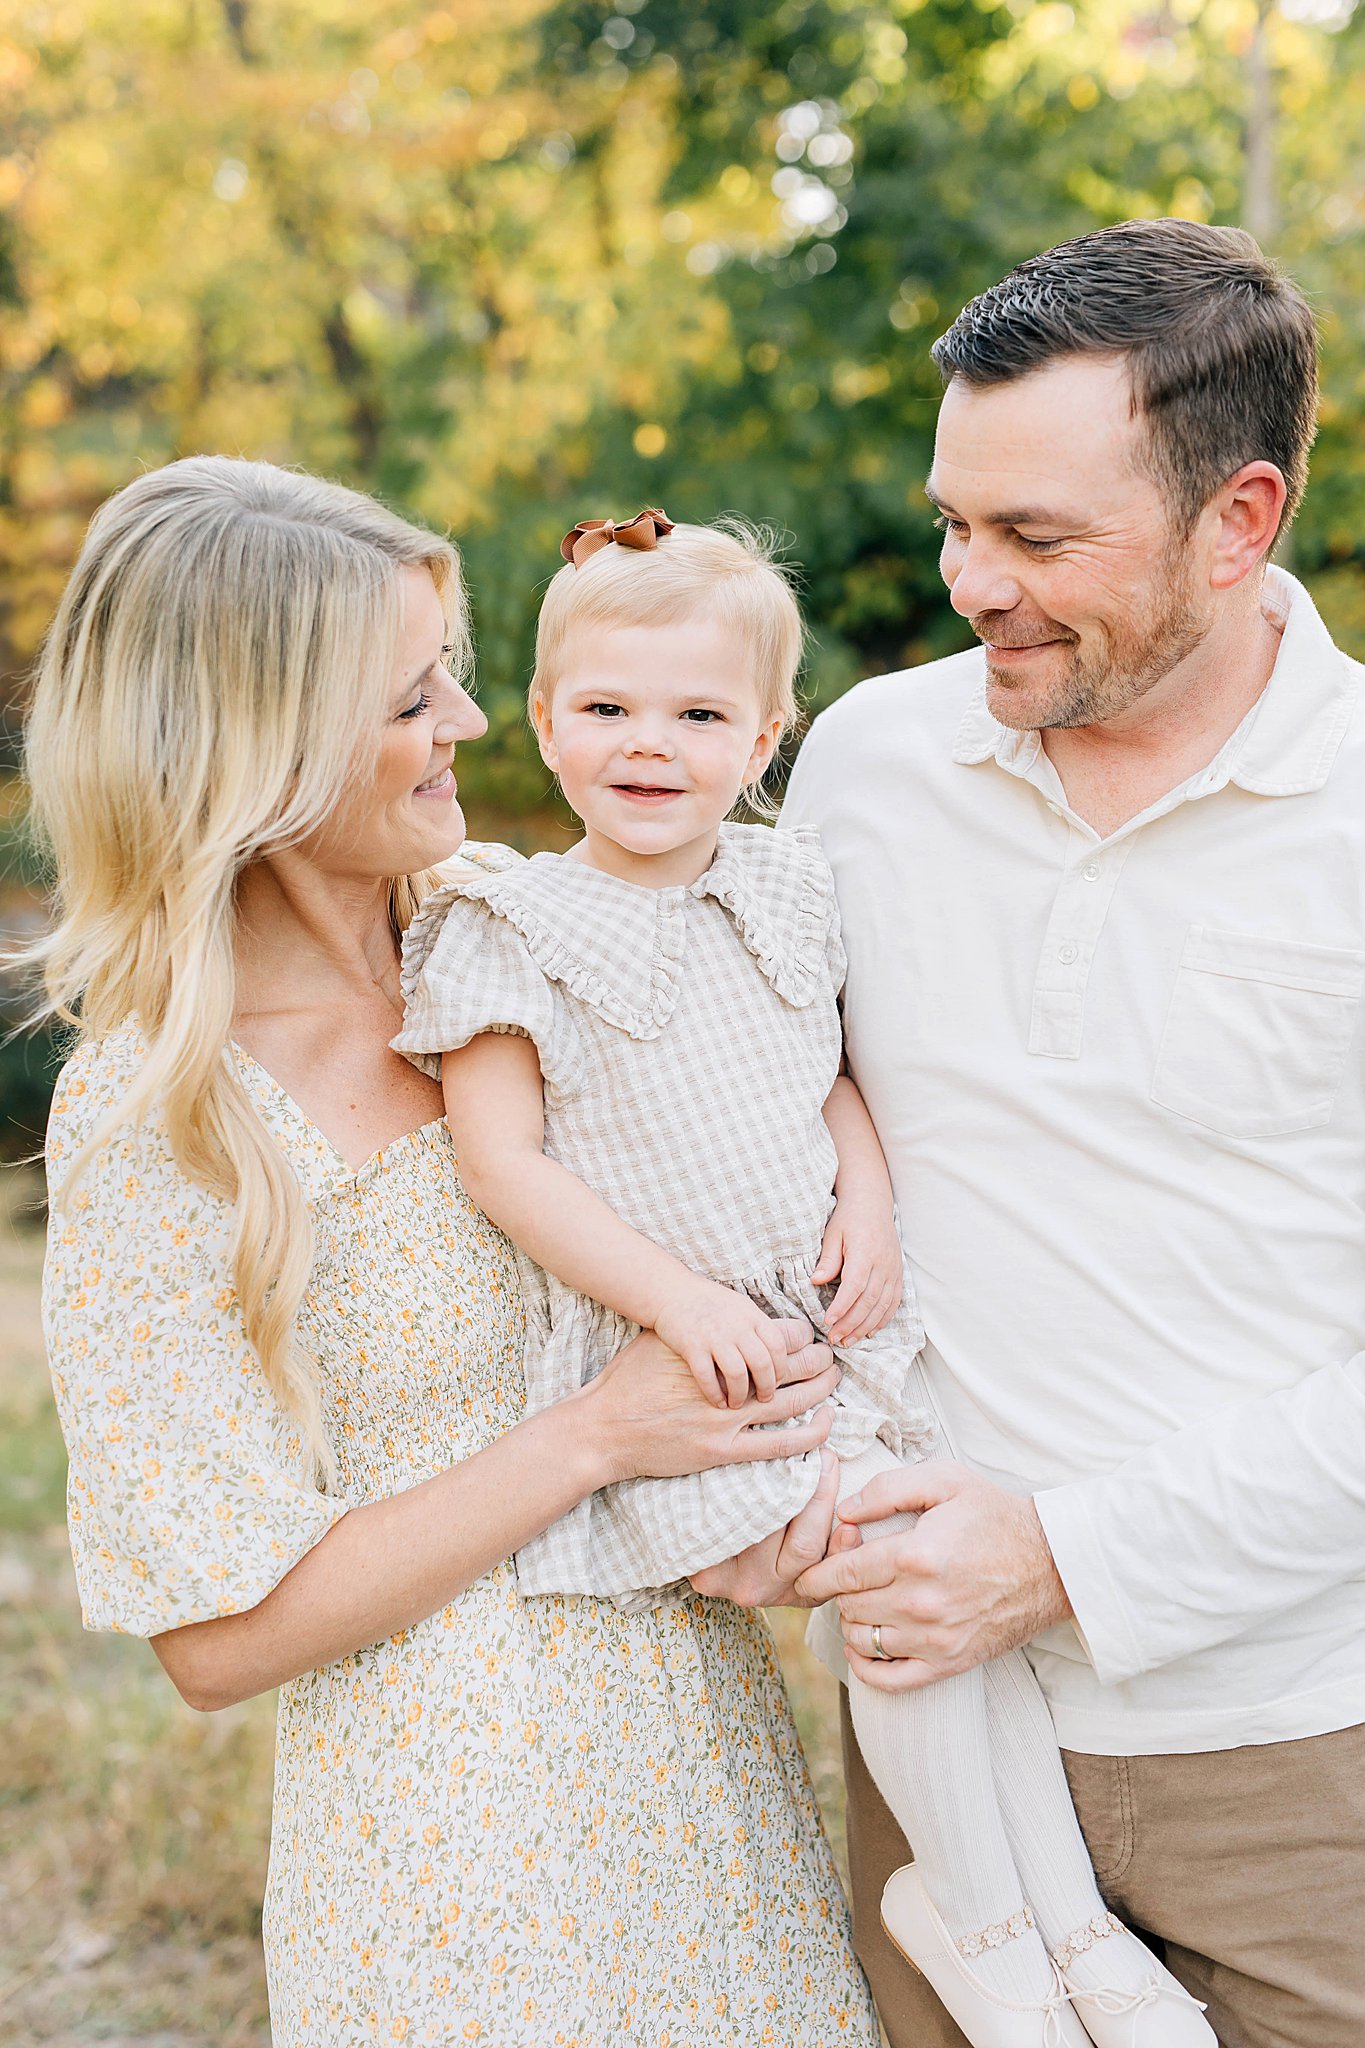 Mom, child and dad smiling in 5 easy ways to prepare your kids for family photos.